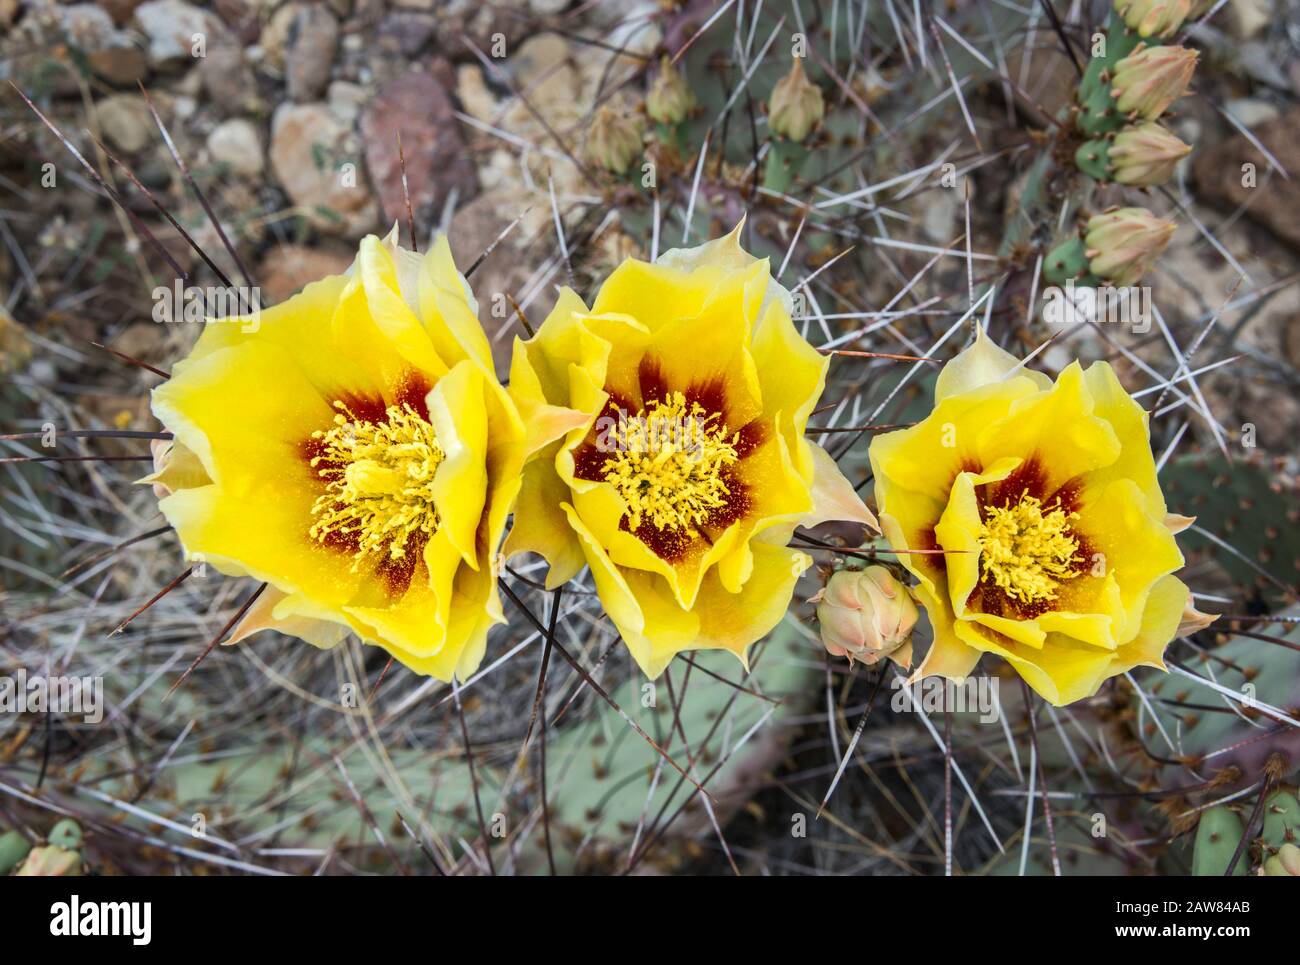 Prickly pear cactus in bloom, Chihuahuan Desert, Big Bend National Park, Texas, USA Stock Photo